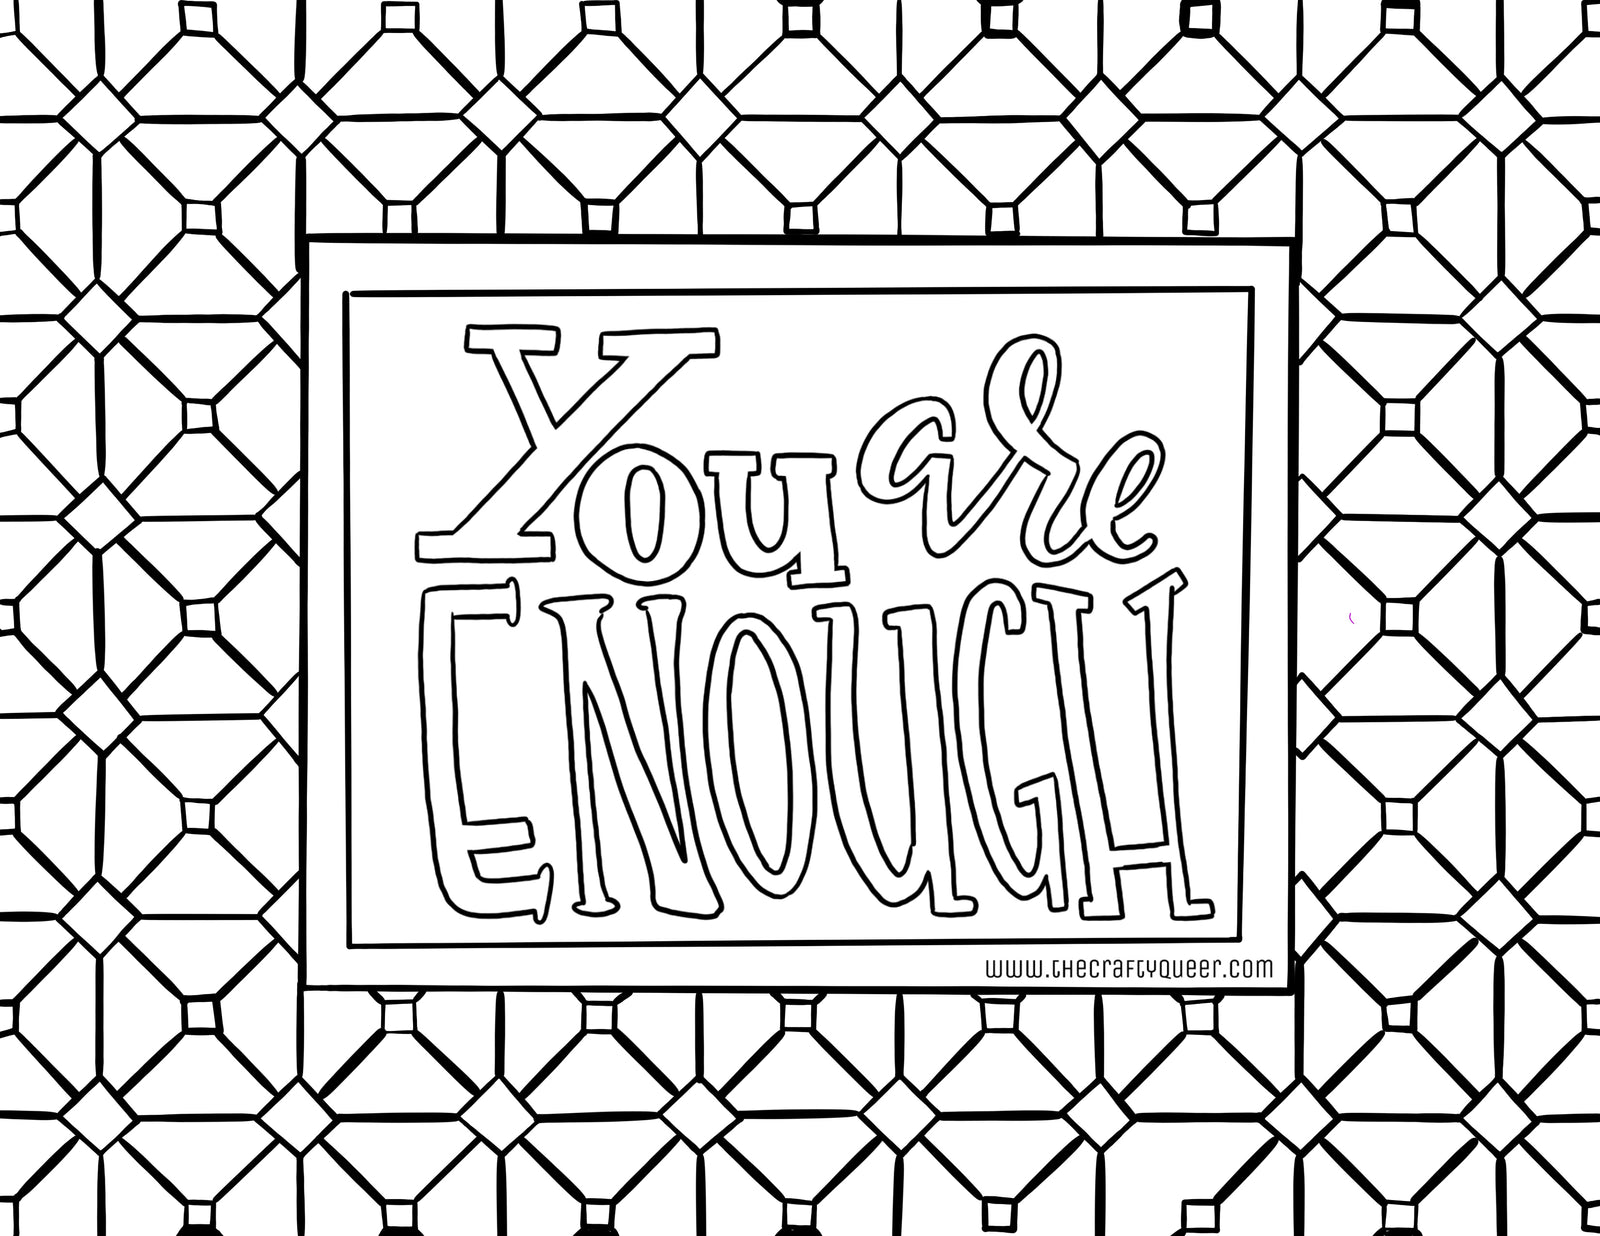 Free coloring pages â the crafty queer